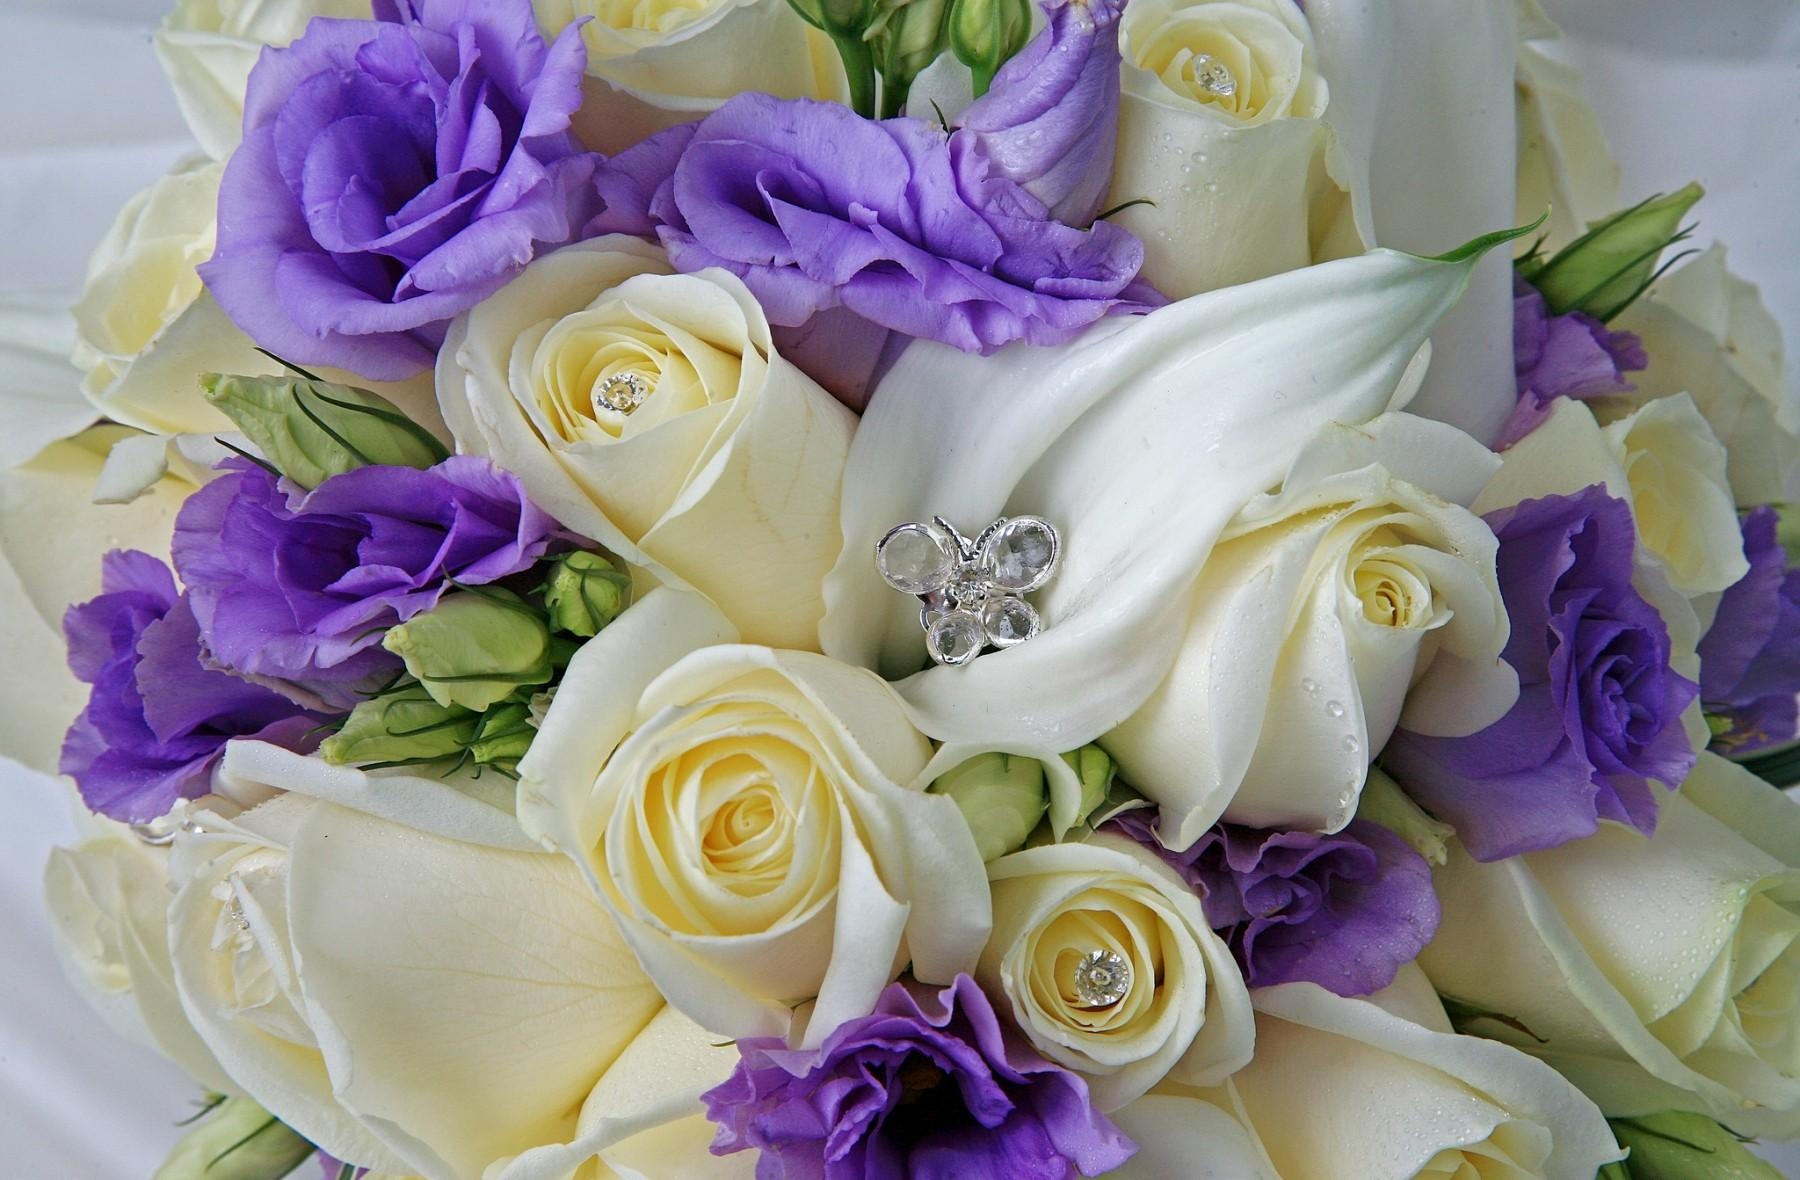 drops, roses, flowers, decorations, bouquet, lisiantus russell, lisianthus russell